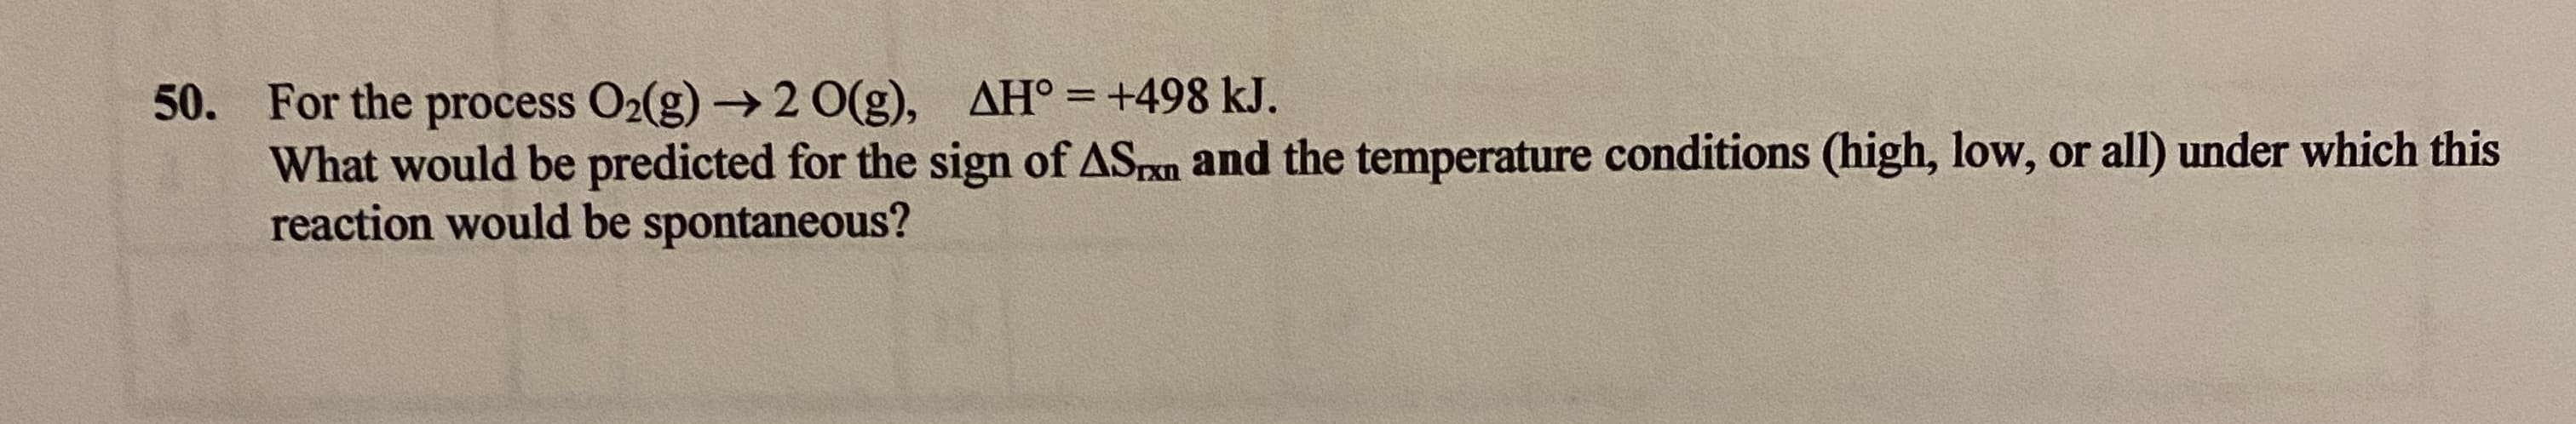 50. For the process O2(g) → 2 O(g), AH° = +498 kJ.
What would be predicted for the sign of ASrxn and the temperature conditions (high, low, or all) under which this
reaction would be spontaneous?
%3D
